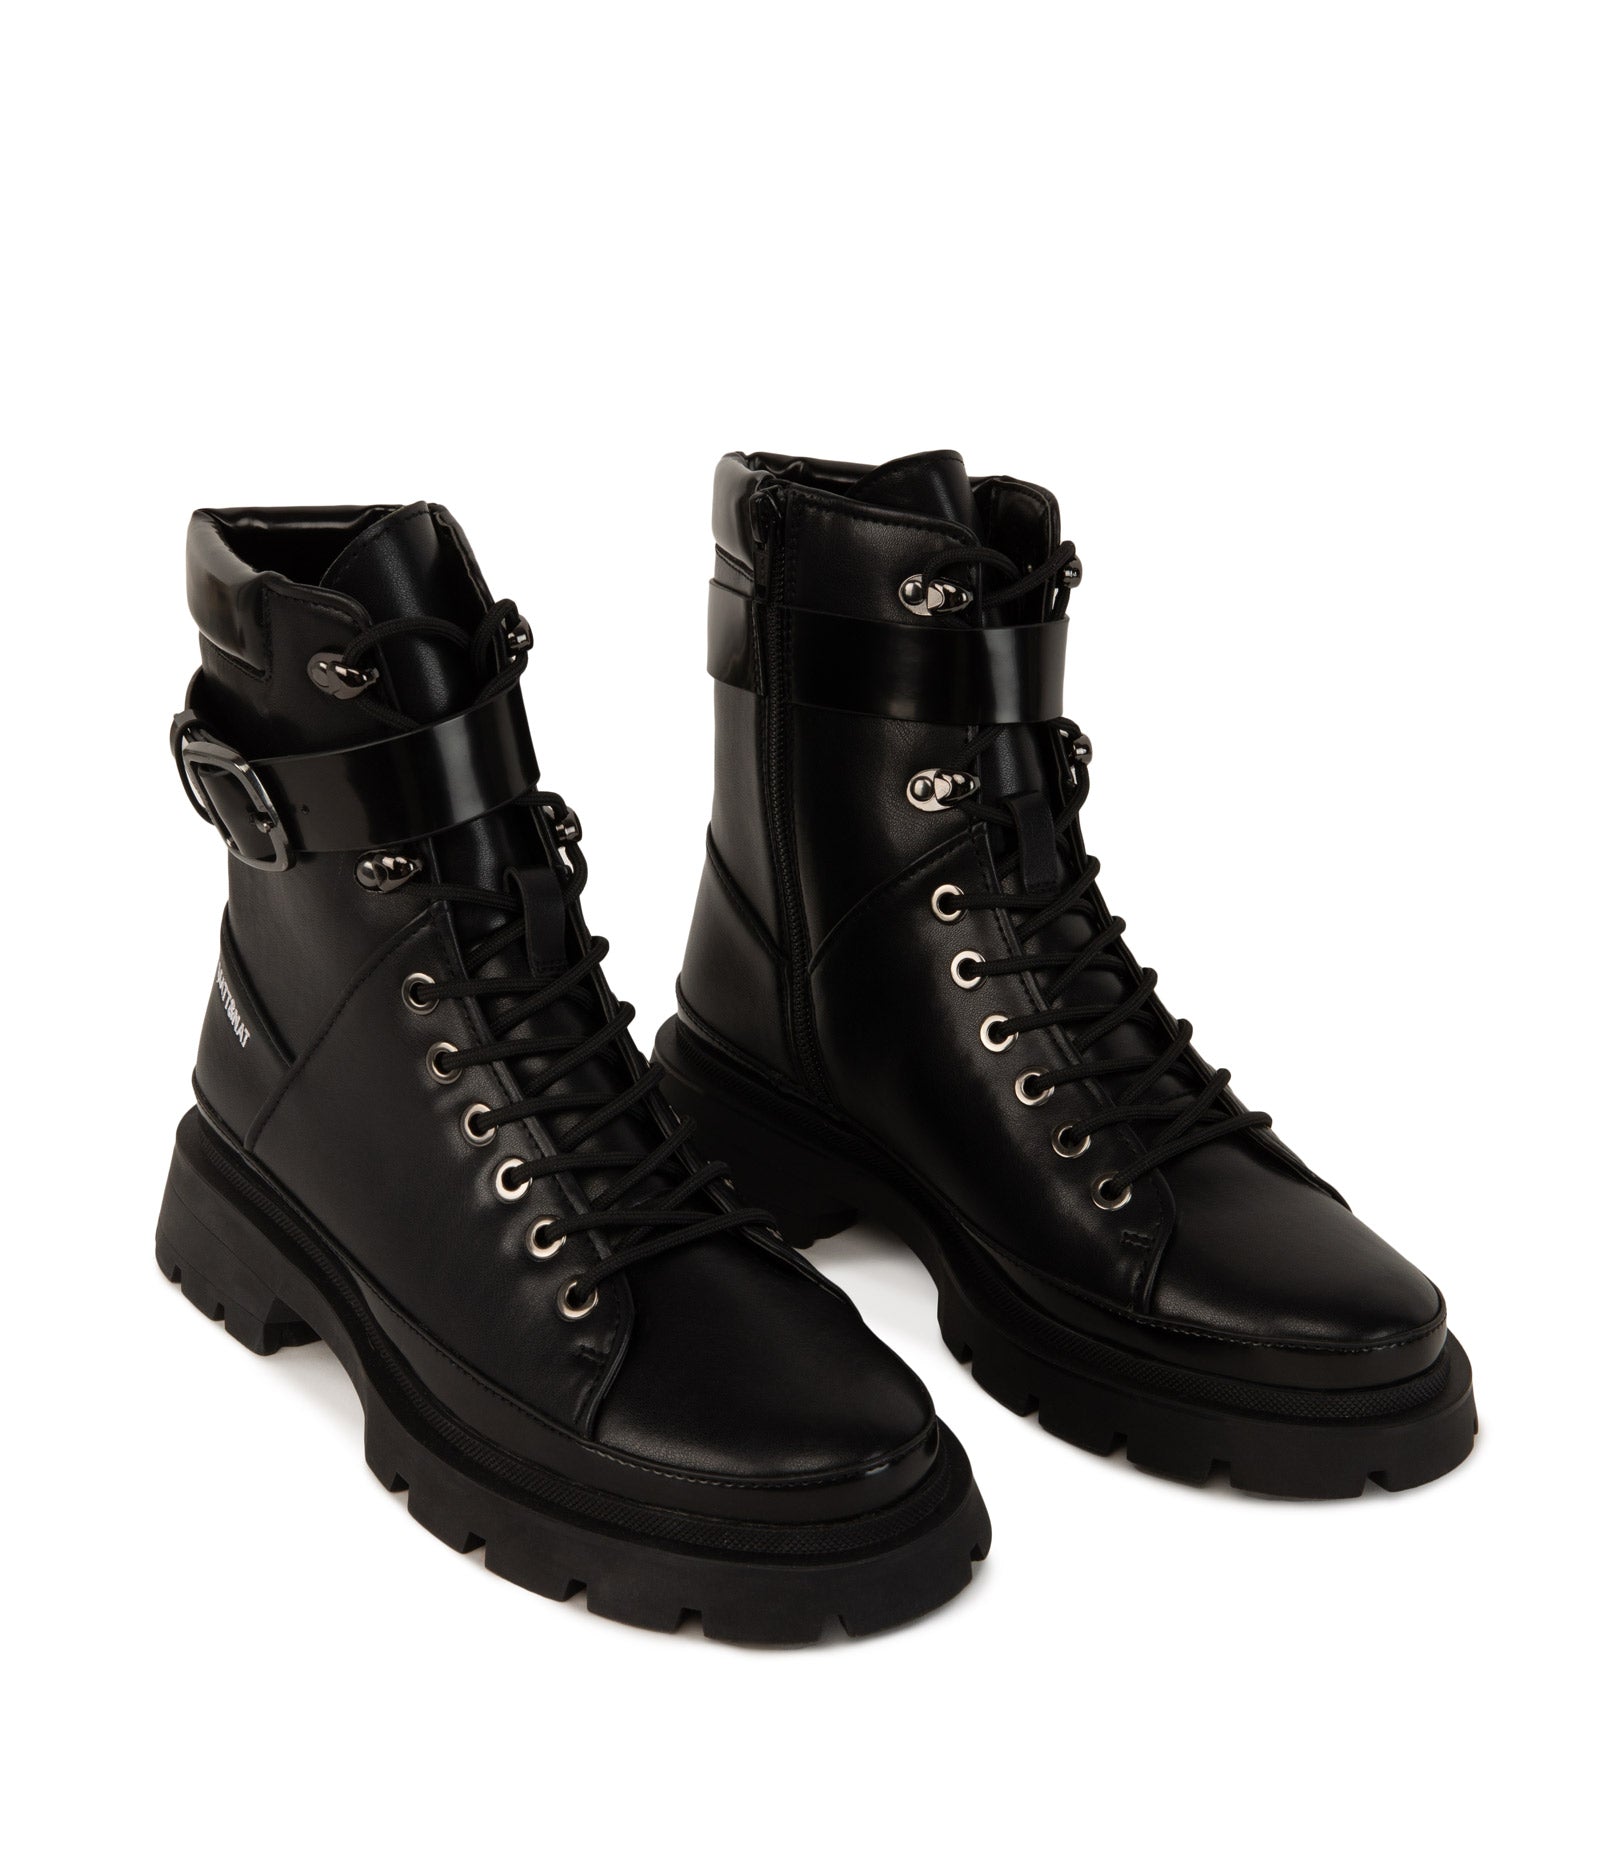 Mnotht 1/6 Scale Women's Police Boots Combat Boots Military Shoes